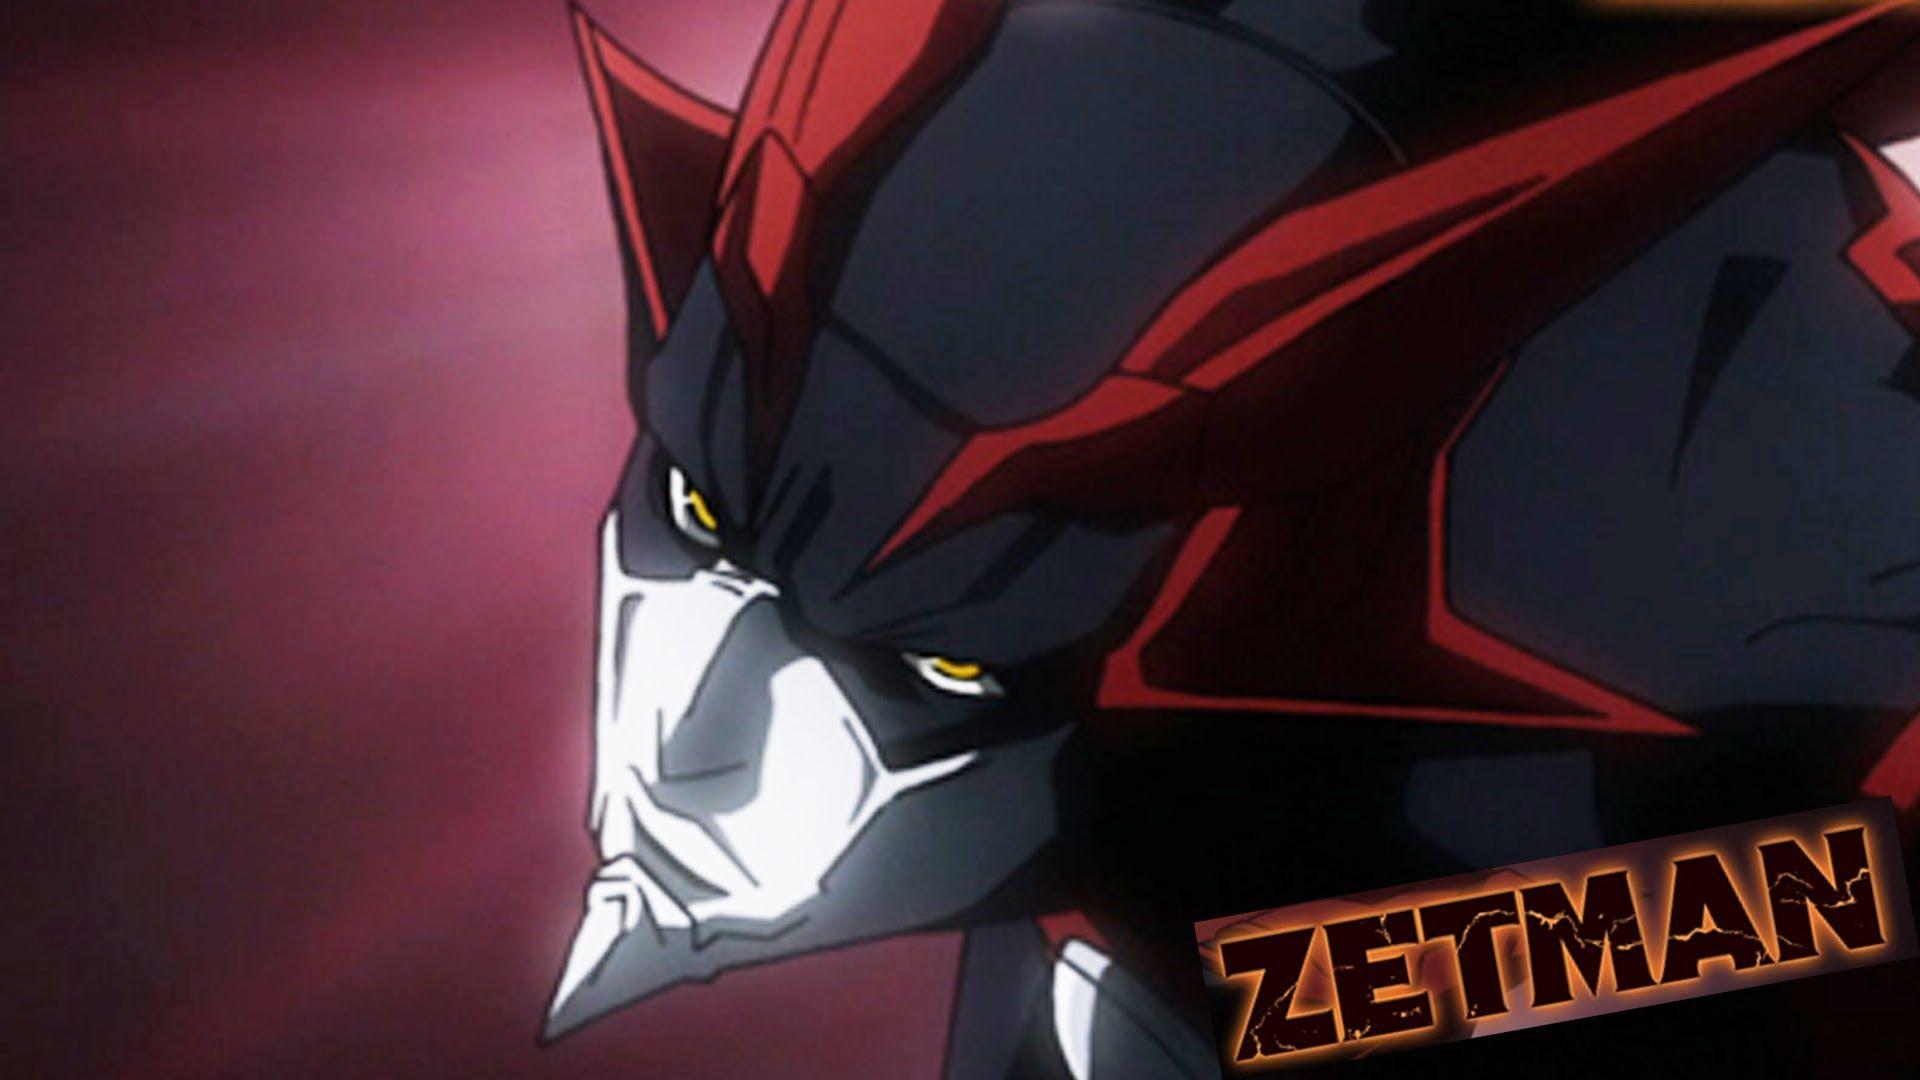 ANIME MADNESS: ZETMAN ANIME SERIES (MANLY!)